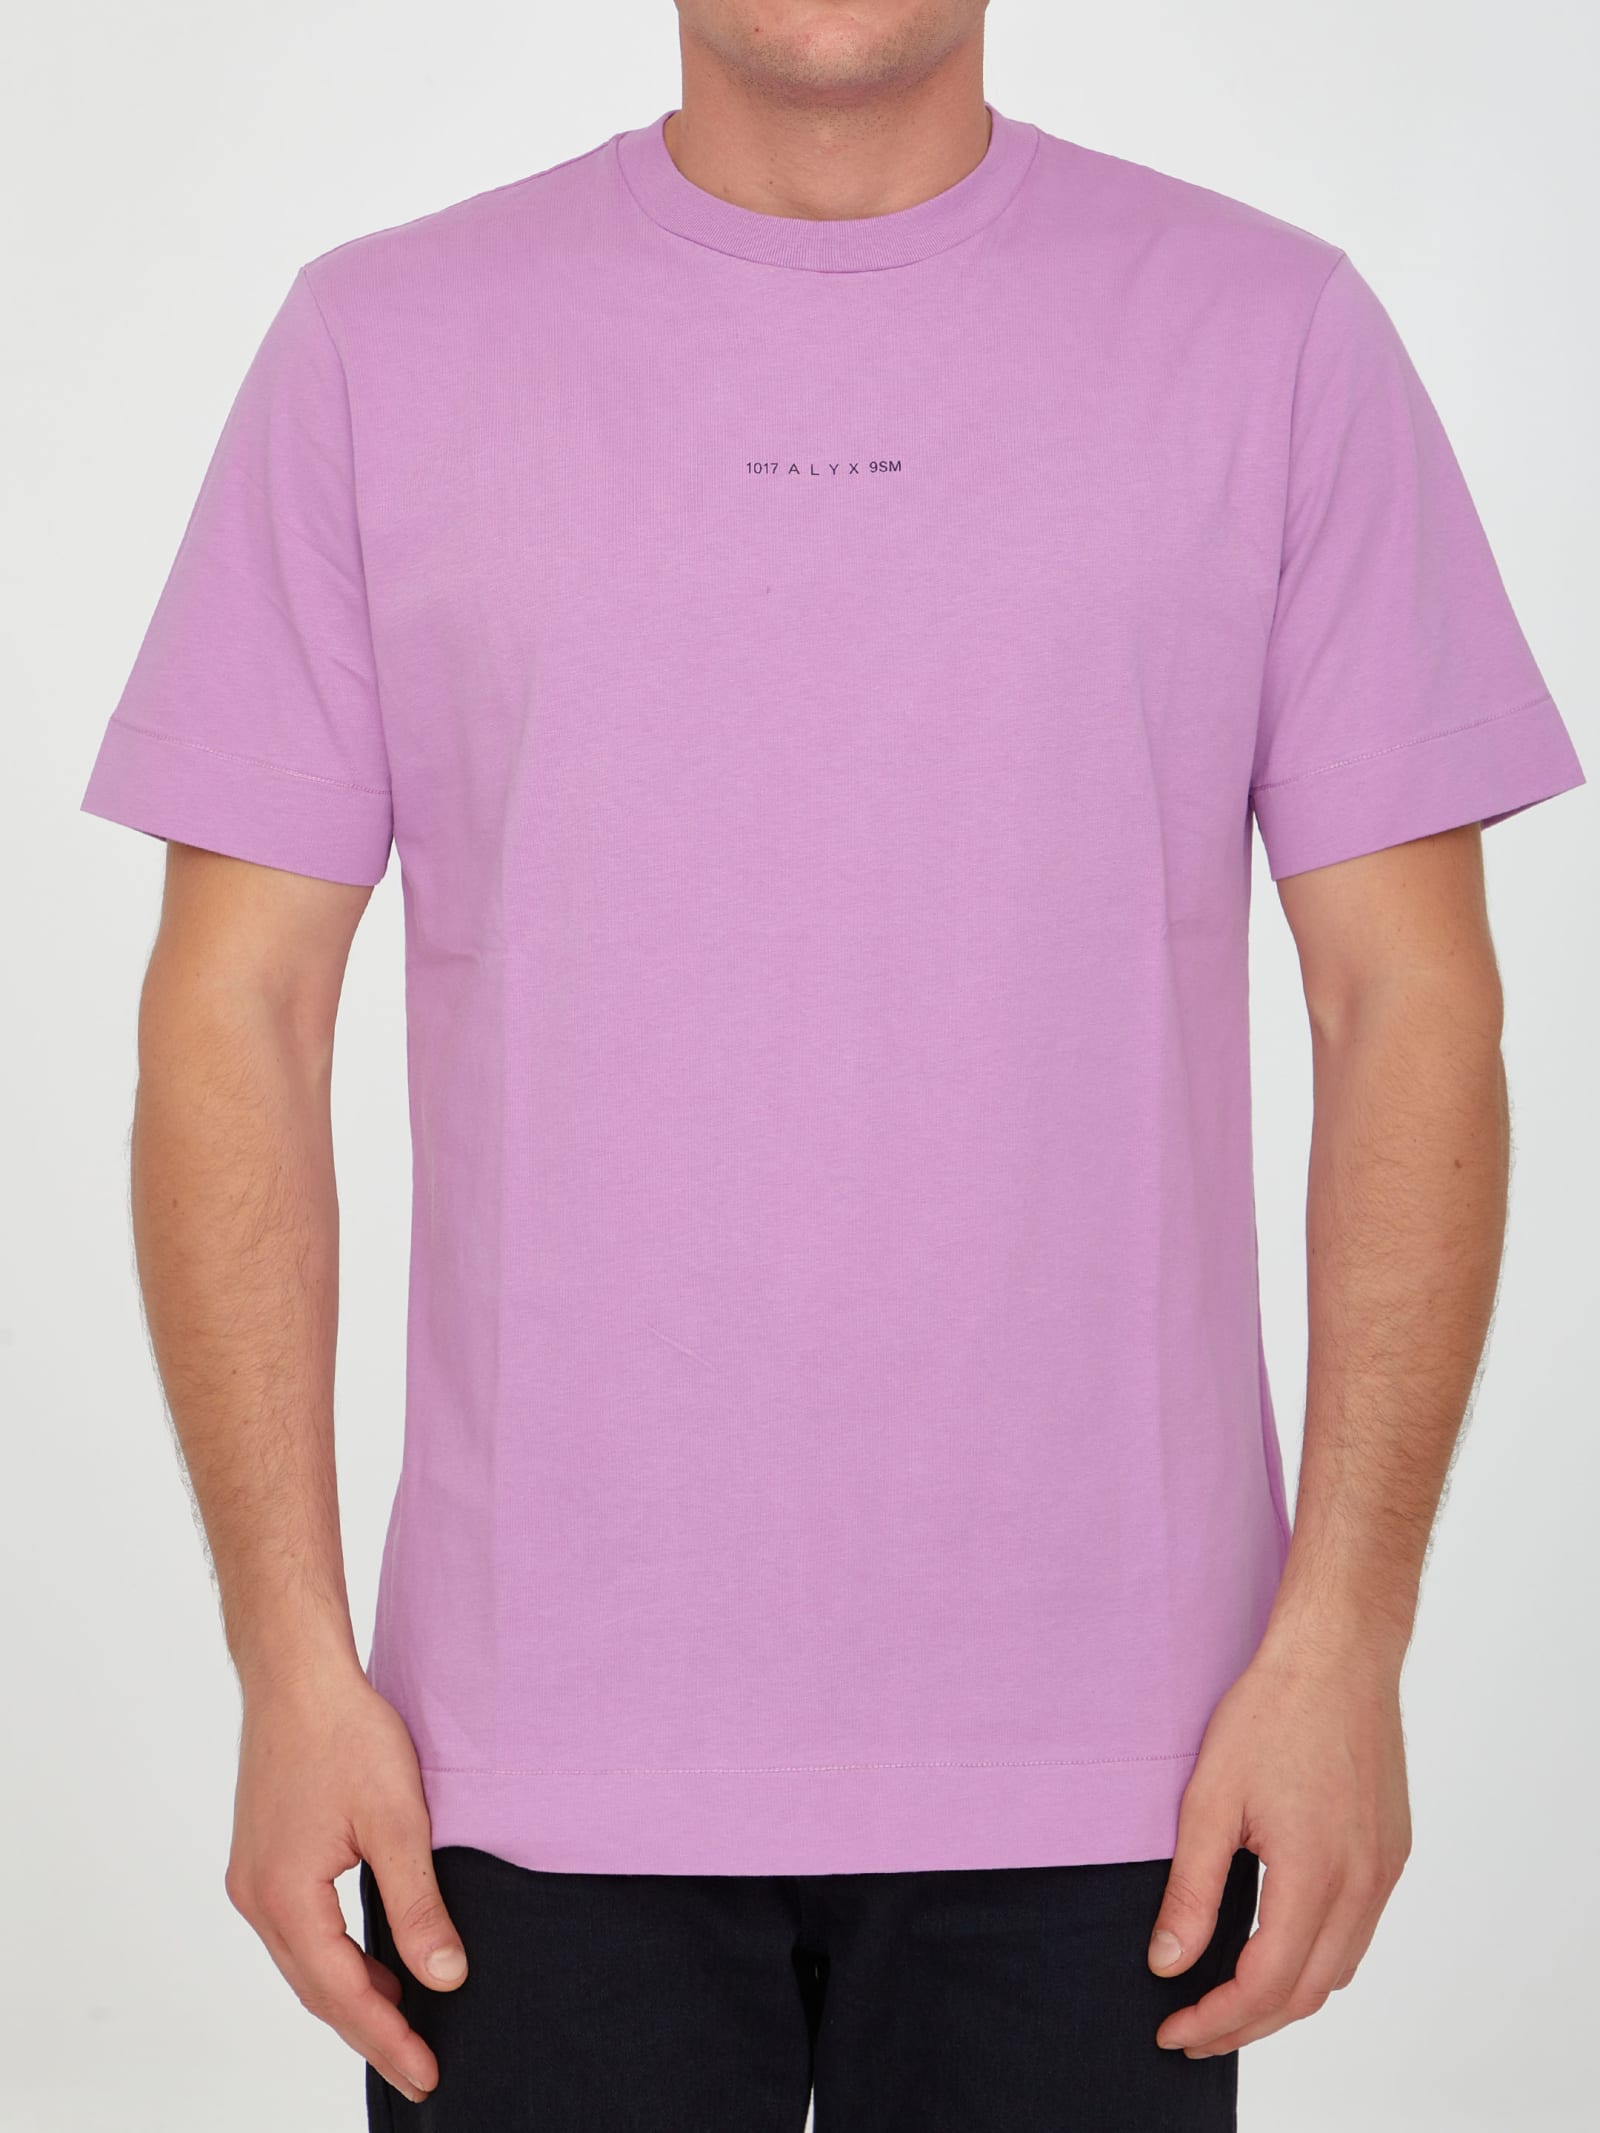 1017 ALYX 9SM Pink T-shirt With Logo